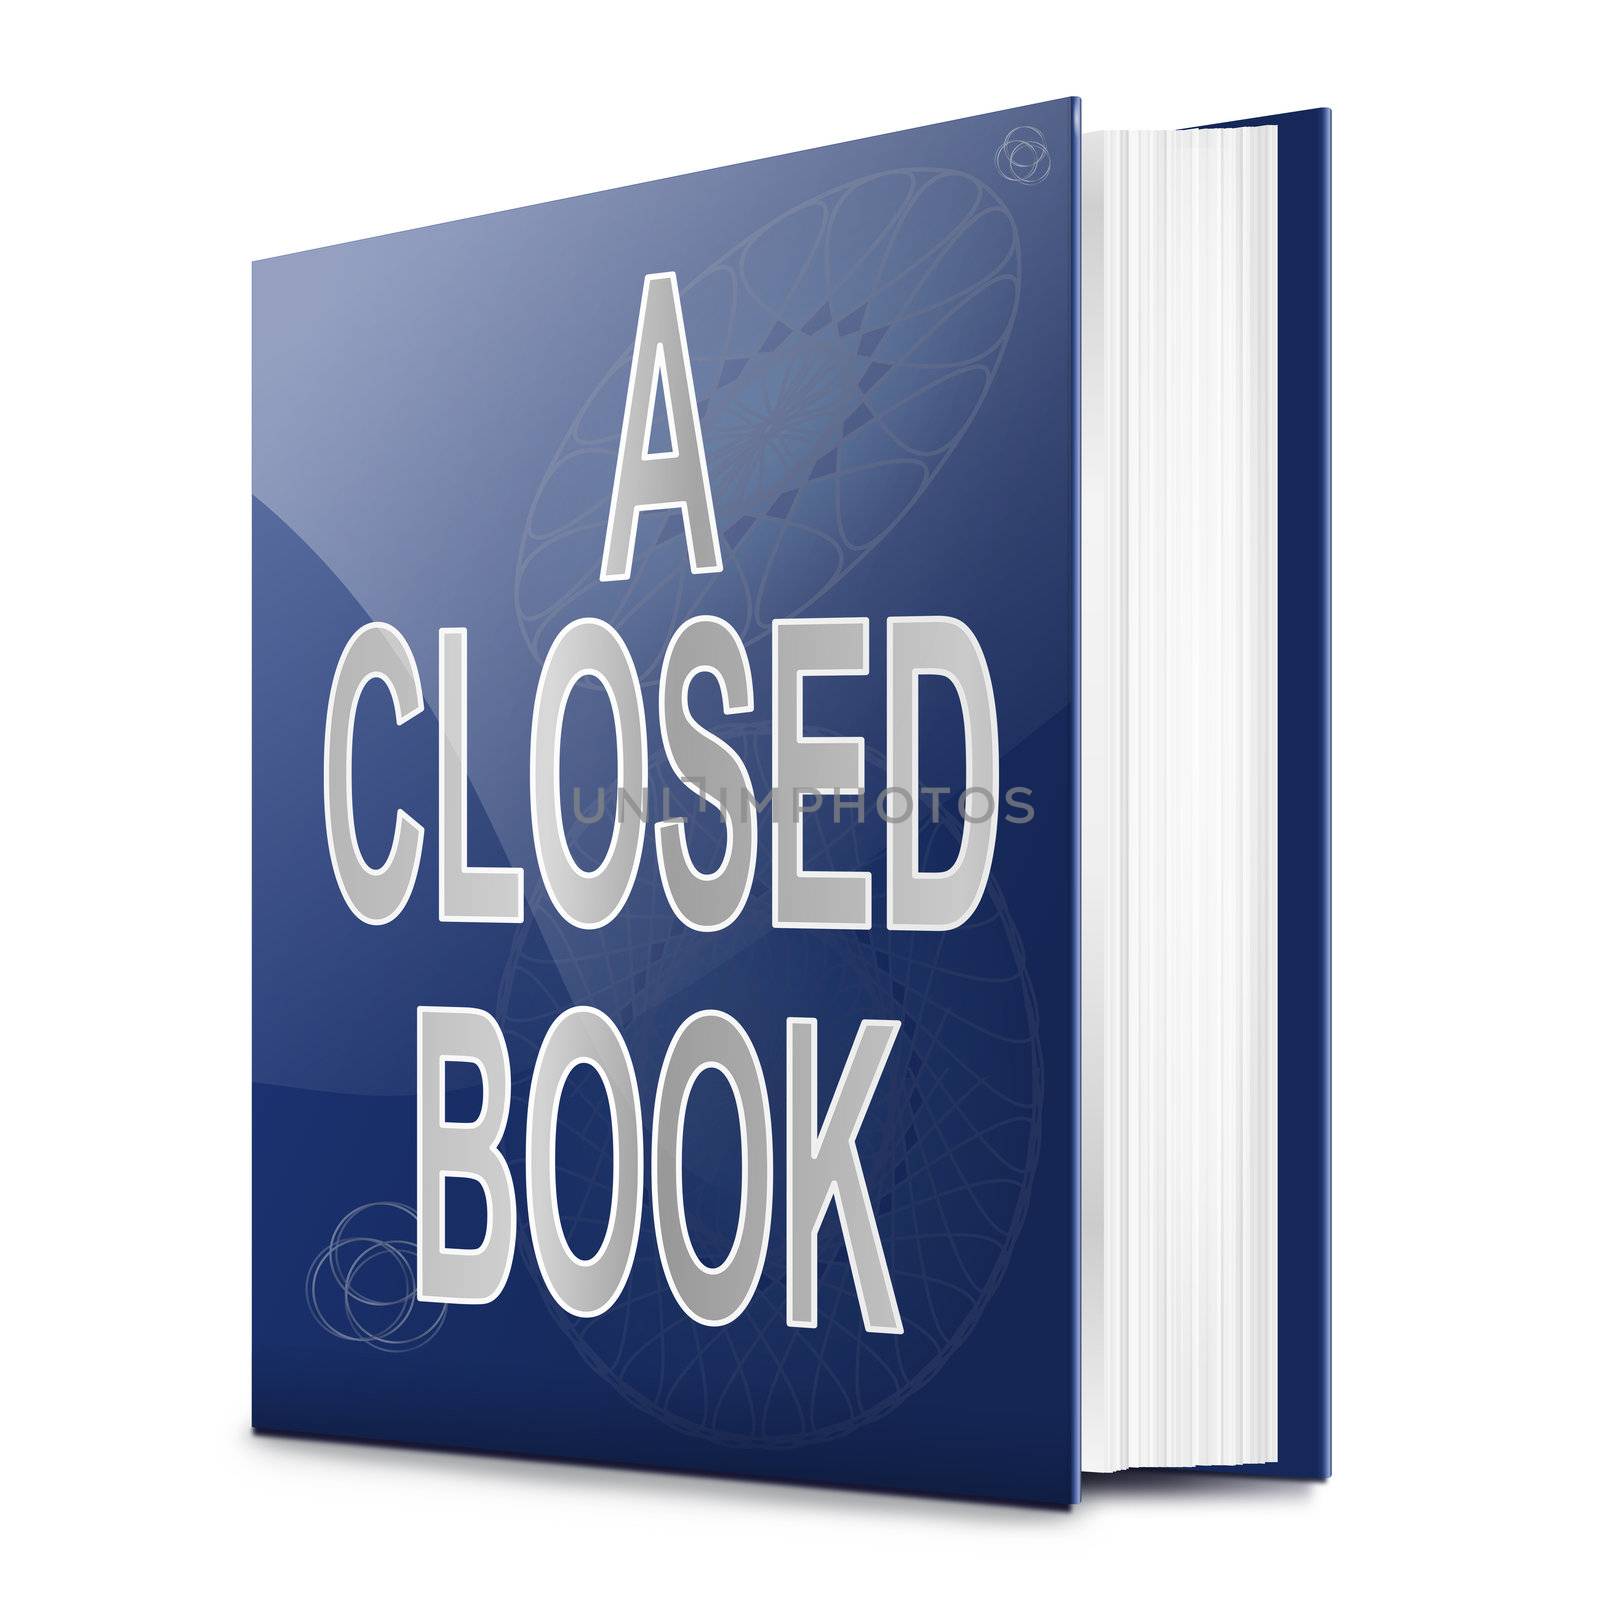 Illustration depicting a book with a closed book concept title. White background.